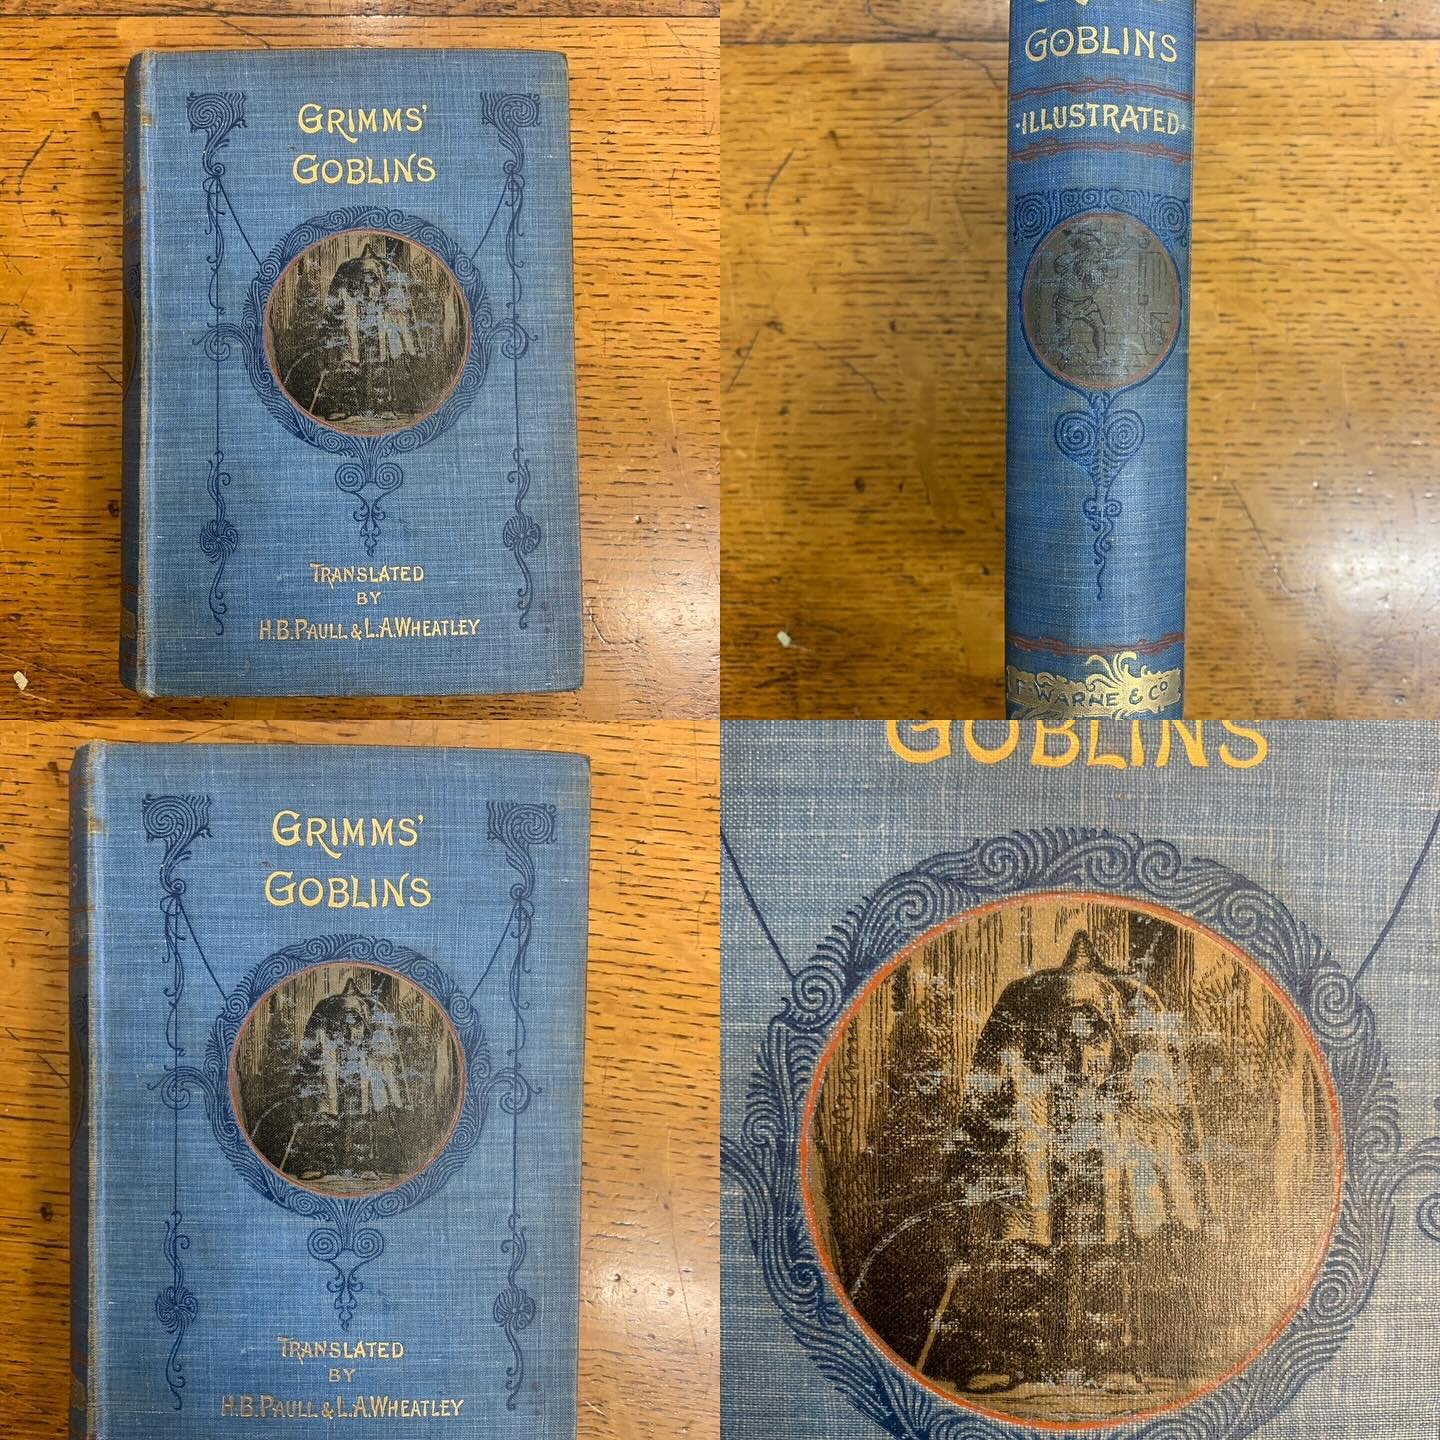 Late Victorian edition of Grimm&rsquo;s Goblins. Very sweet copy of the classic fairy tales. Available at the shop @greenwichmarket.
#grimmfairytales 
#grimmbrothers 
#fairytale 
#folkstories 
#childrensbooks 
#childrensbookillustration 
#antiquarian